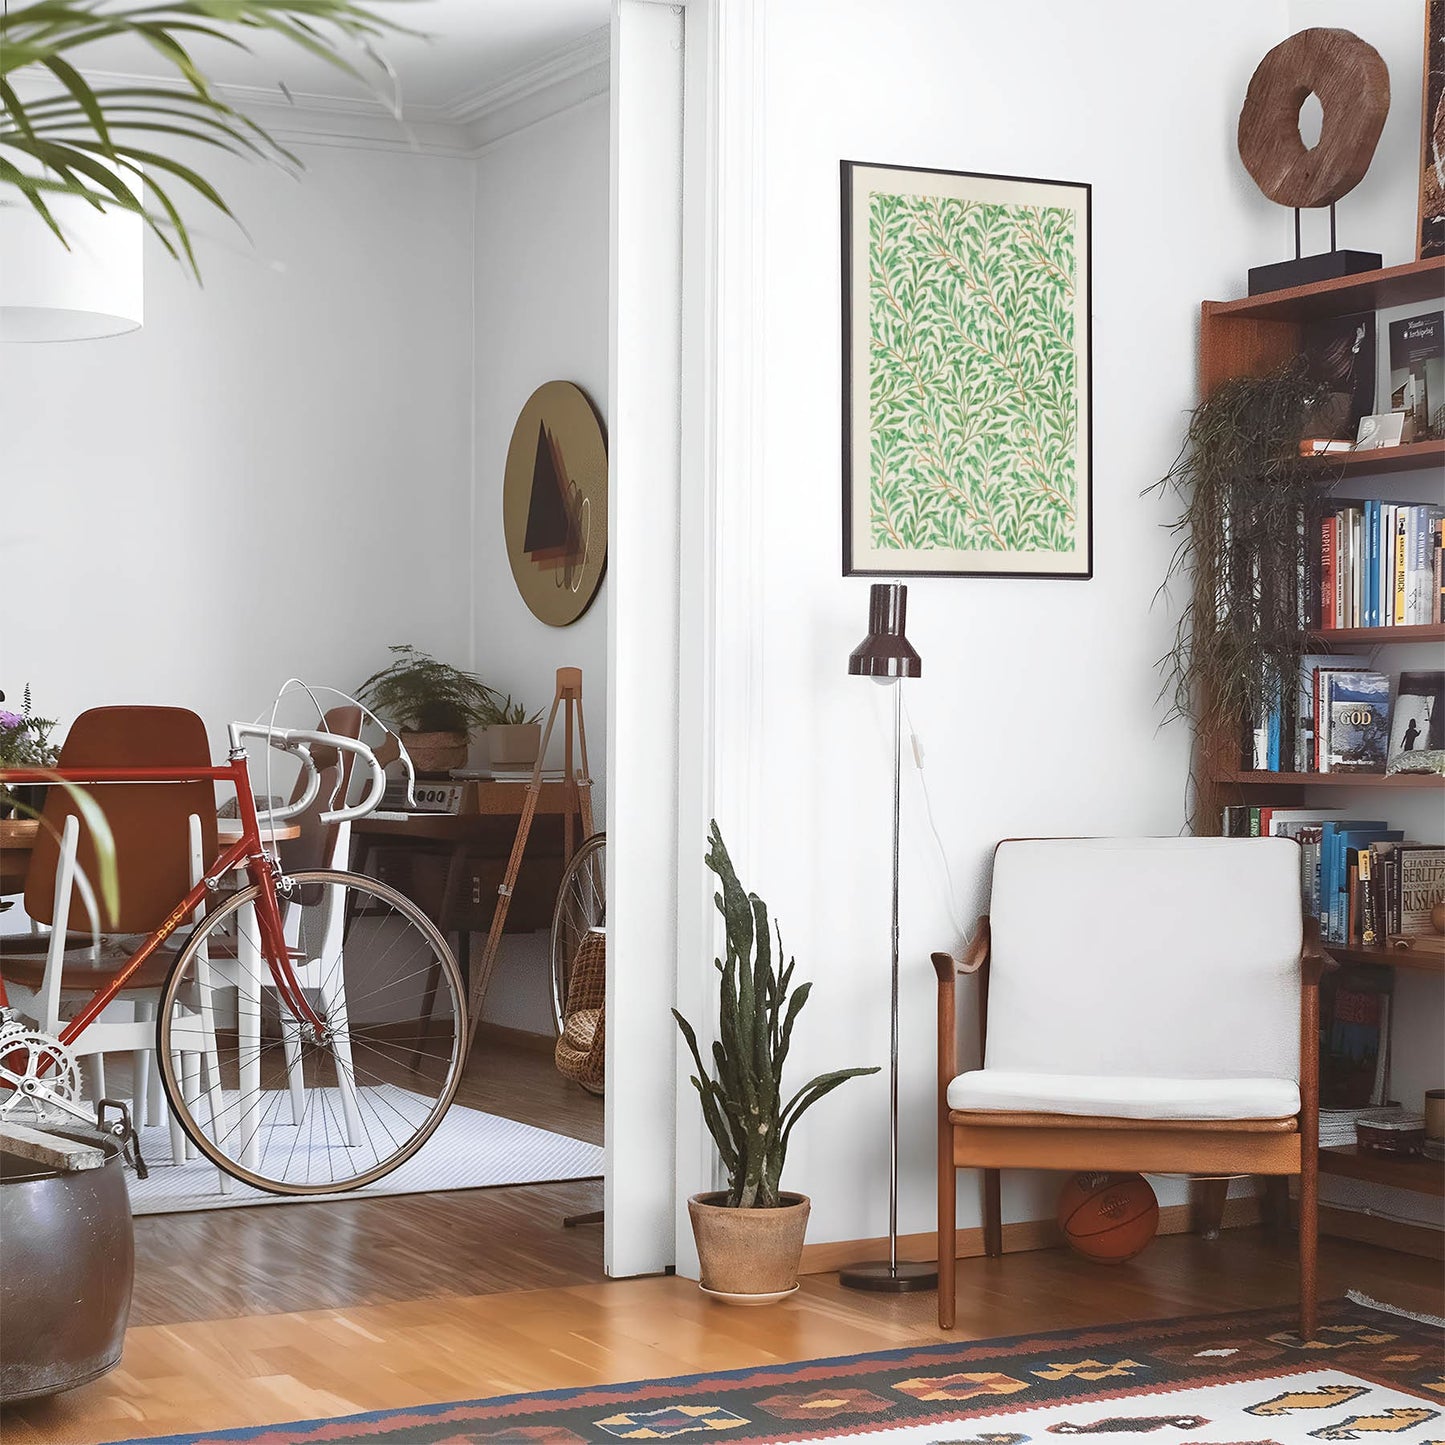 Eclectic living room with a road bike, bookshelf and house plants that features framed artwork of a Interwoven Plants above a chair and lamp